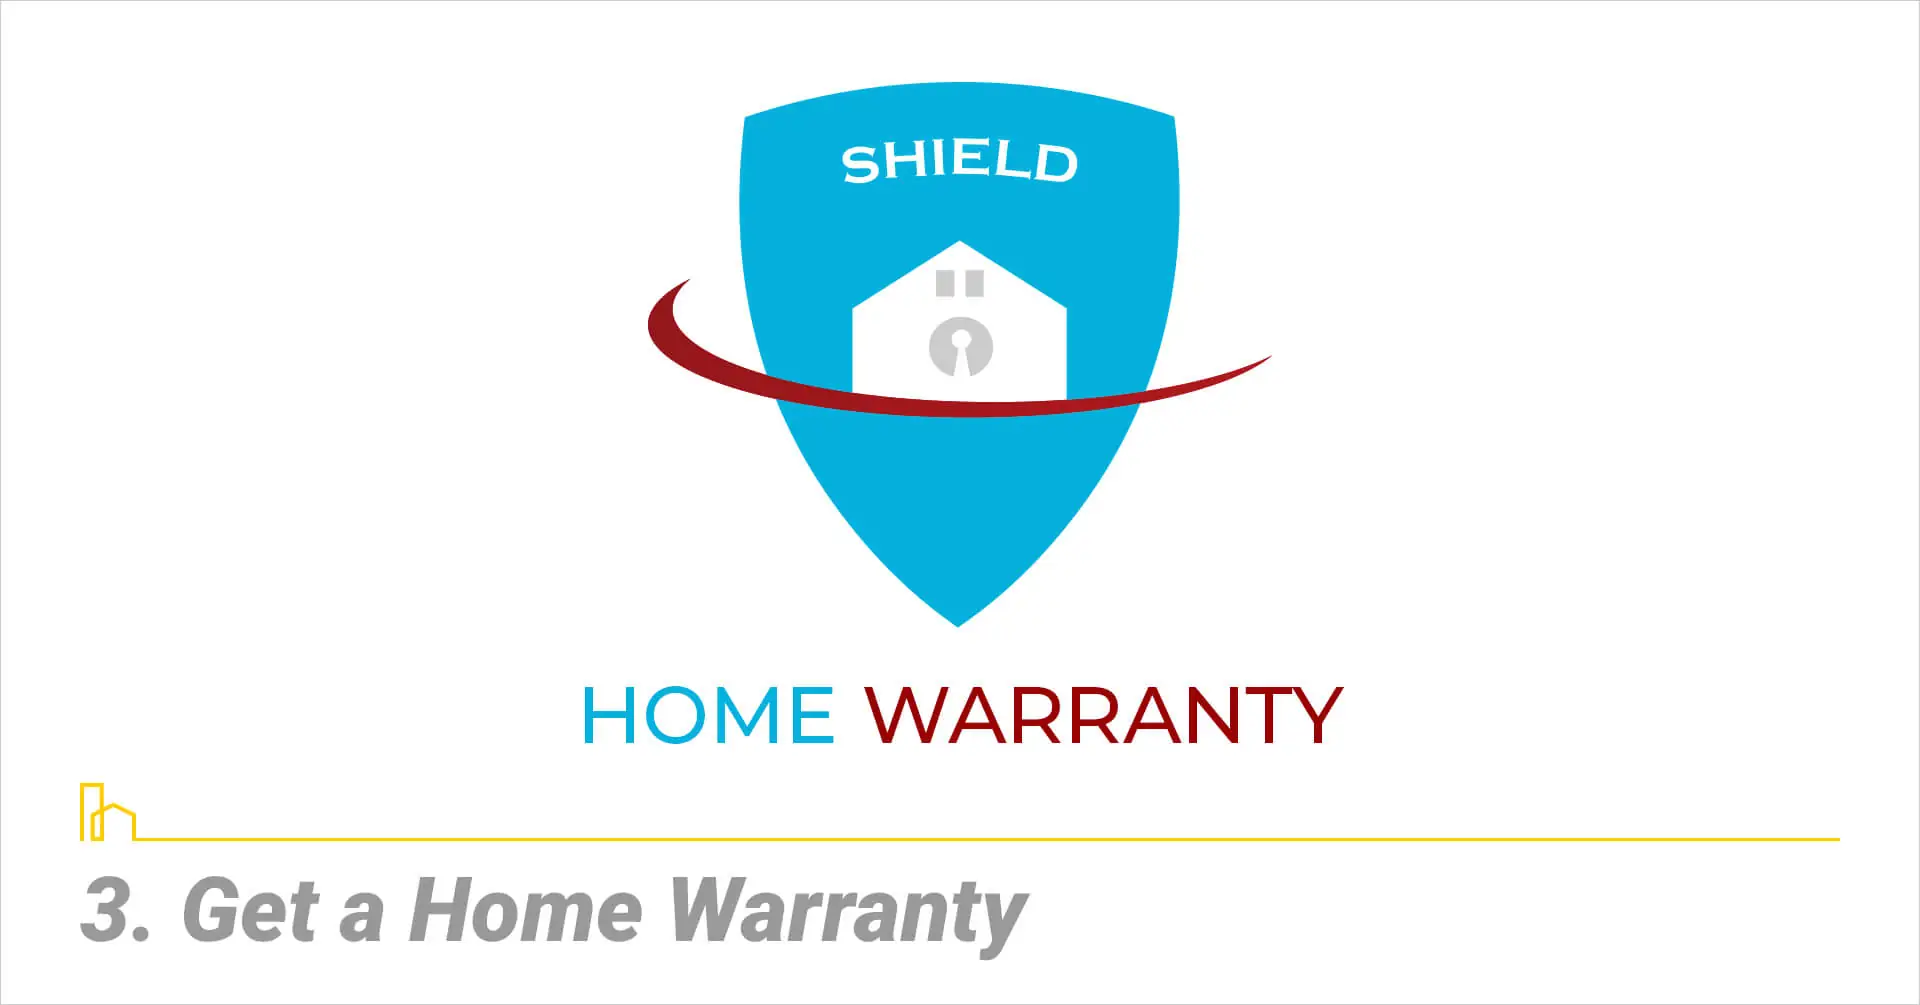 Get a Home Warranty, get your home protected